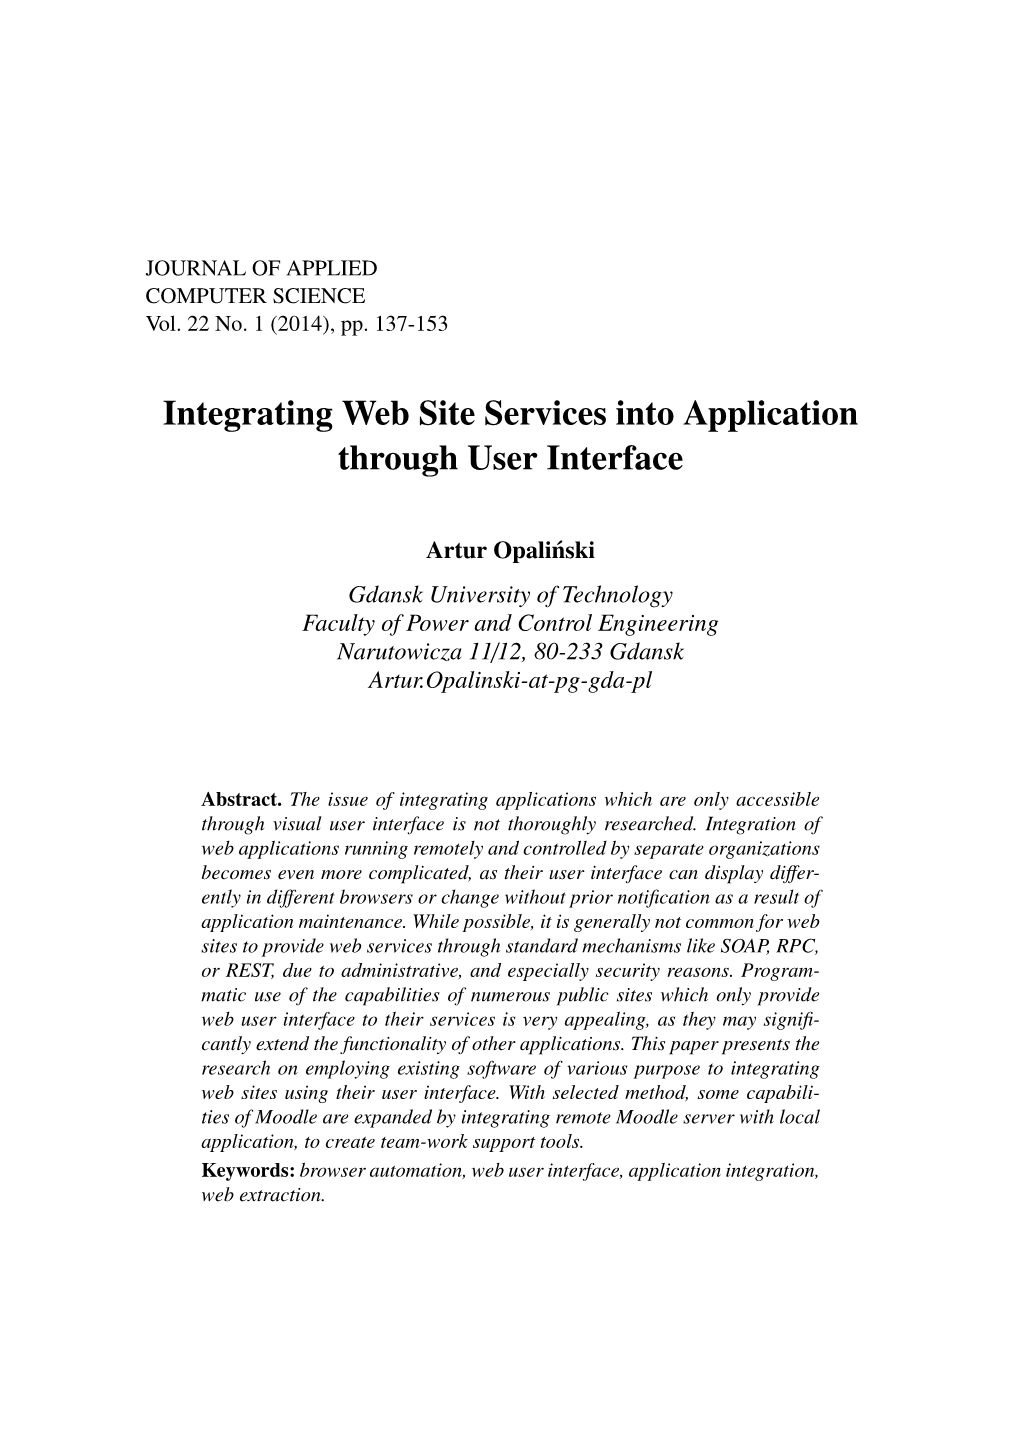 Integrating Web Site Services Into Application Through User Interface